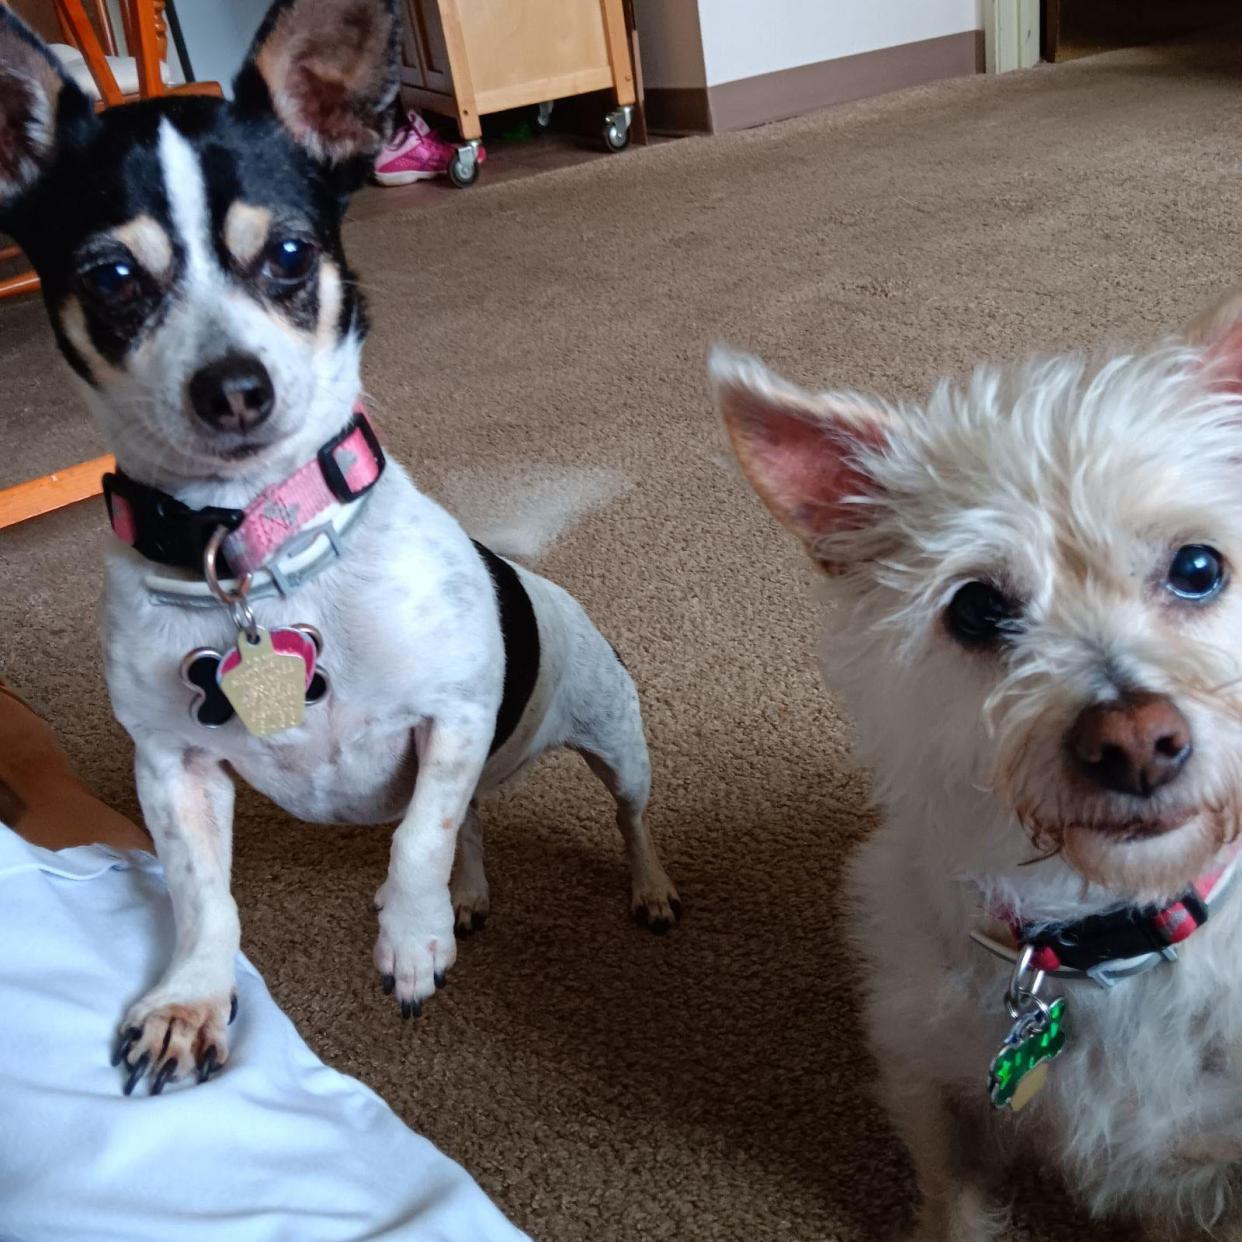 Linda (left), a Chihuahua, and Sophie (right), a terrier, both died following an attack by four German shepherds in Oak Creek on Nov. 30.